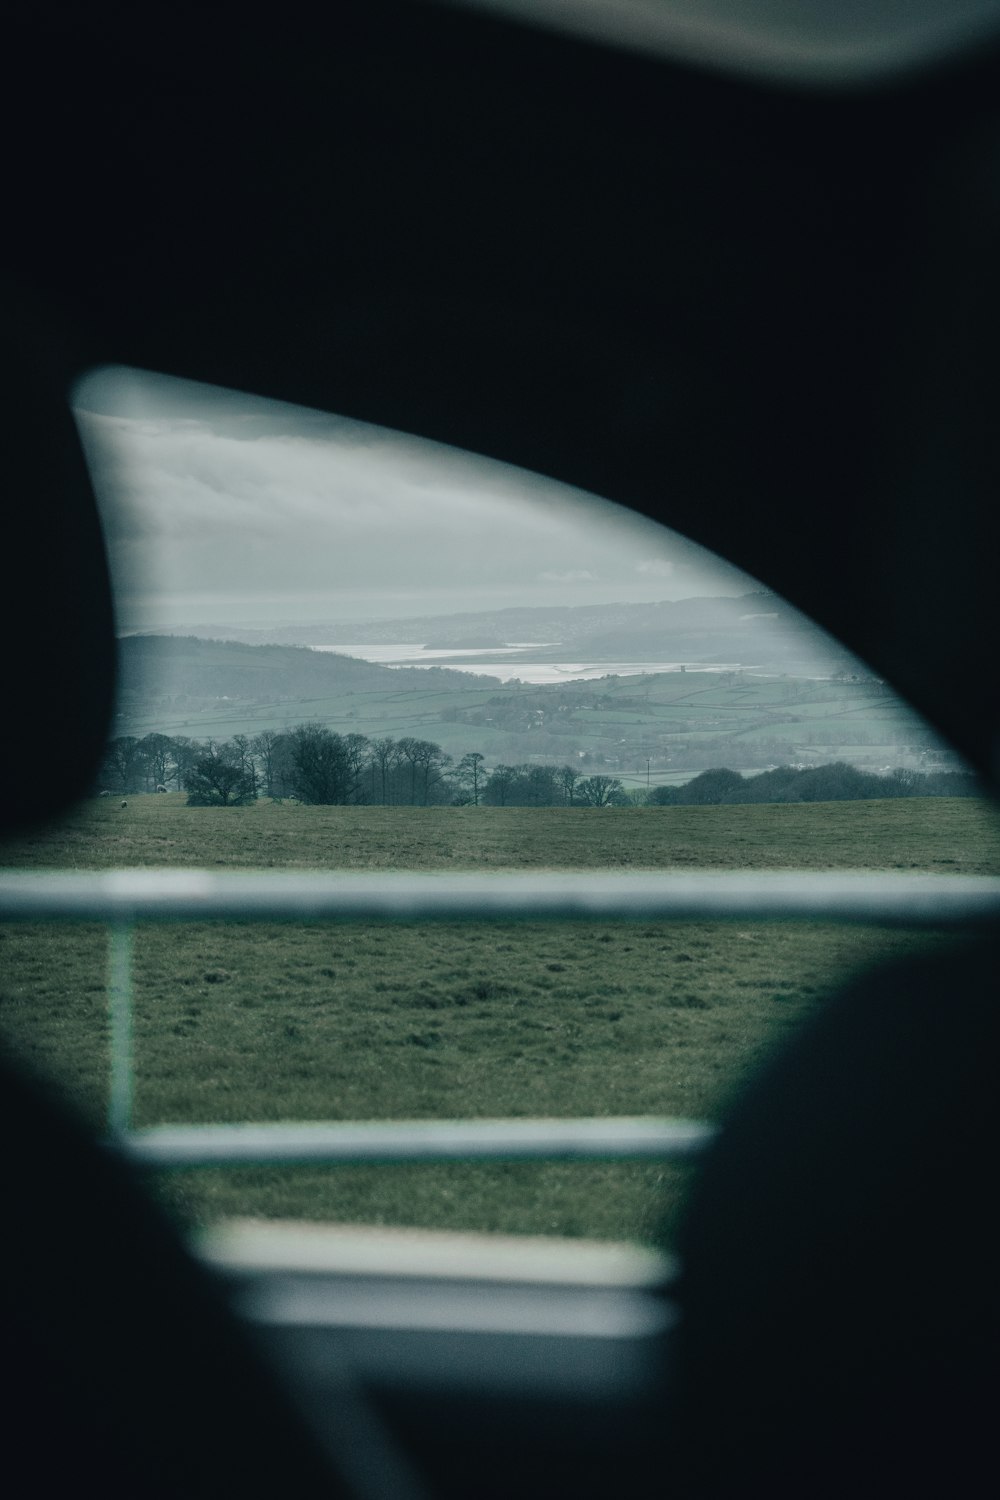 a view of a field from inside a vehicle